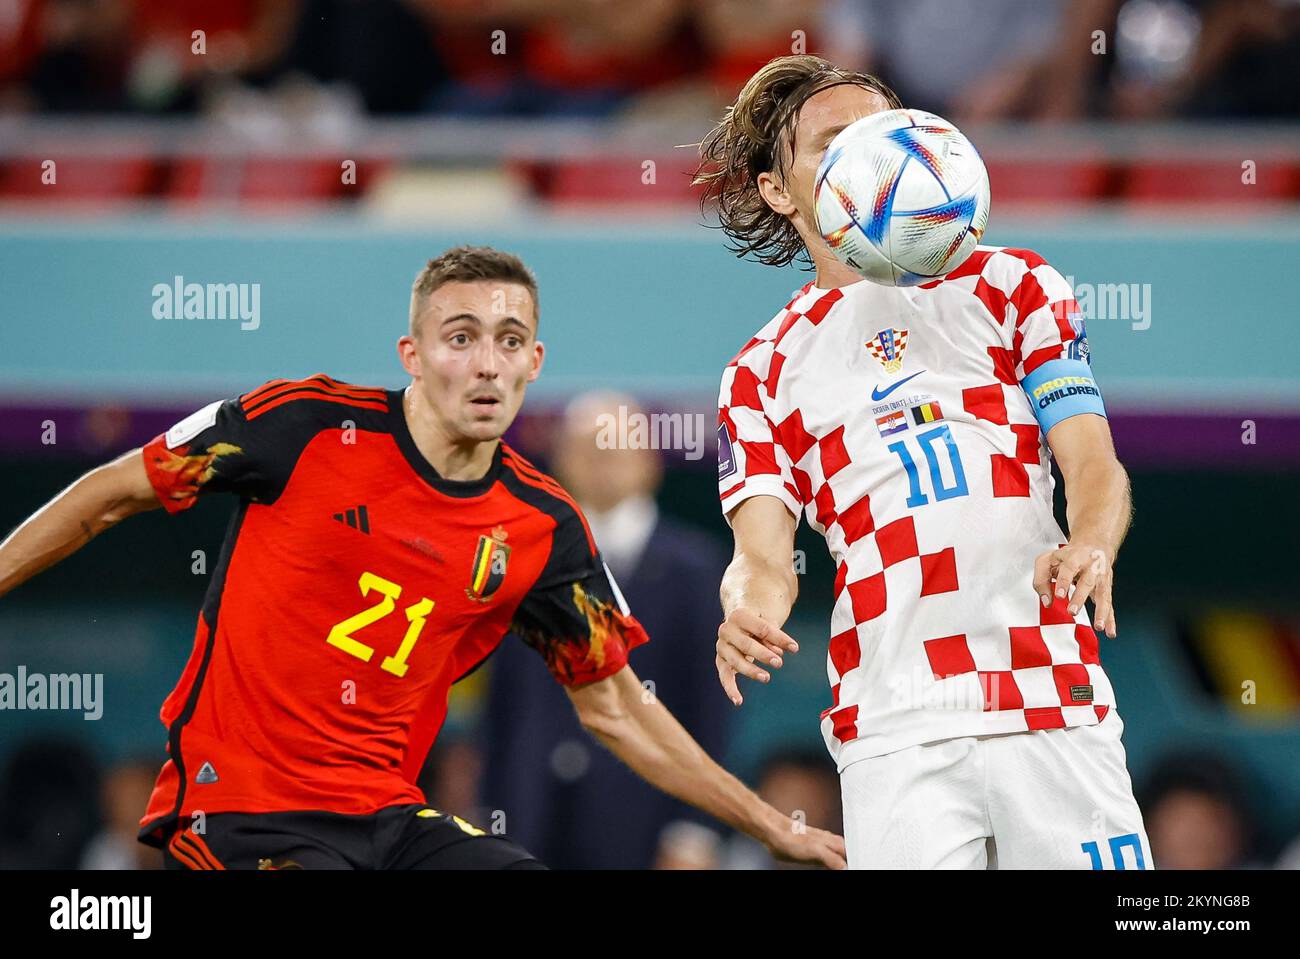 Doha, Catar. 01st Dec, 2022. CASTAGNE Timothy from Belgium MODRIC Luka from Croatia during the match between Tunisia and France, valid for the group stage of the World Cup, held at the Education City Stadium in Doha, Qatar. Credit: Rodolfo Buhrer/La Imagem/FotoArena/Alamy Live News Stock Photo